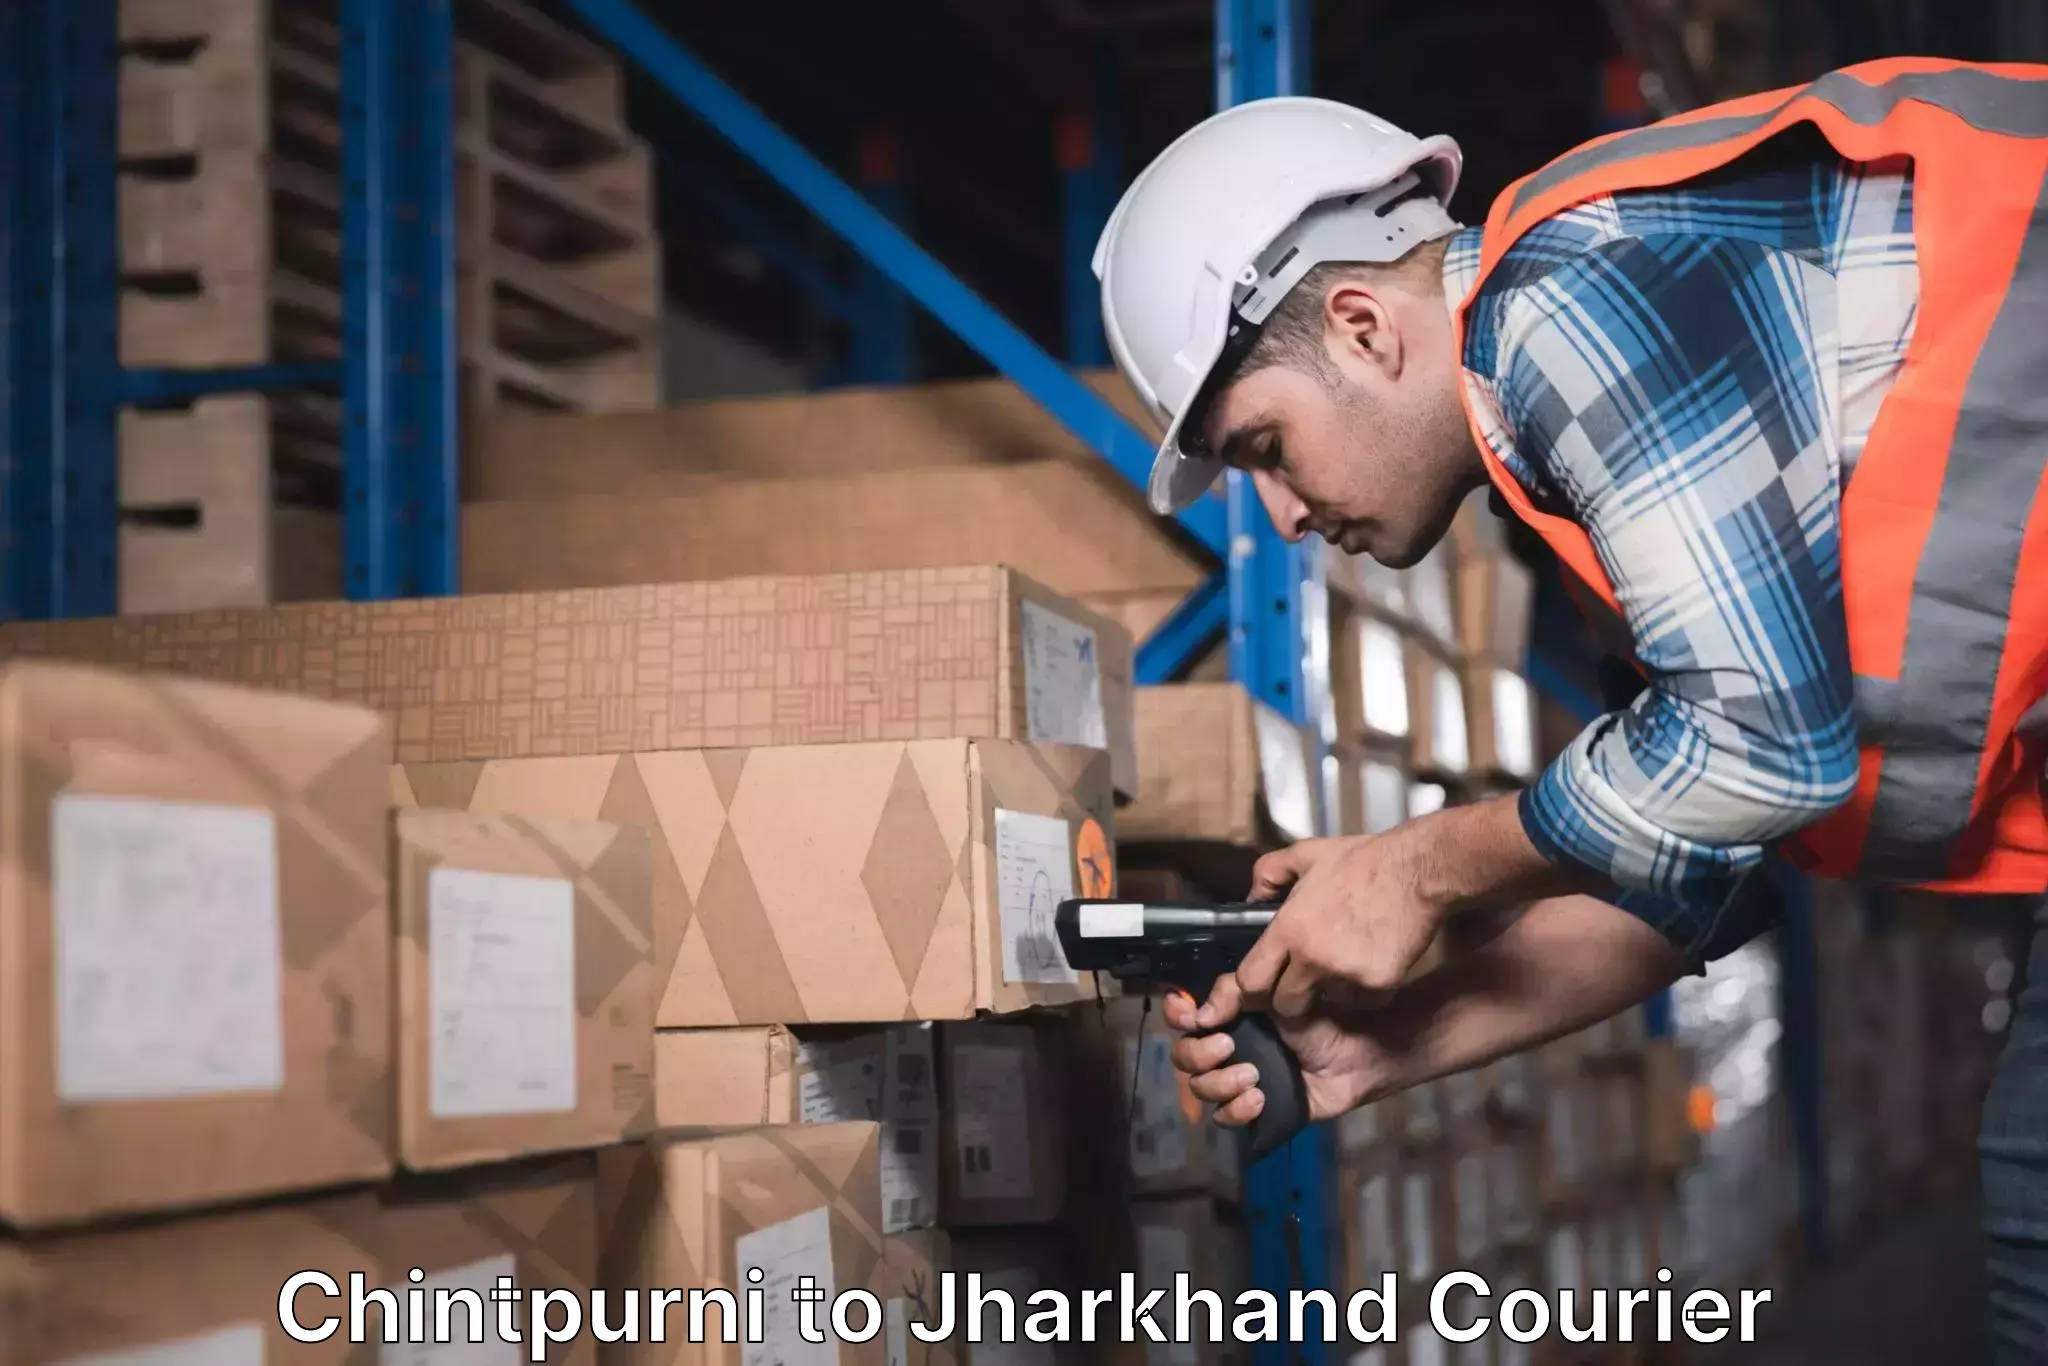 Courier service efficiency in Chintpurni to Jharkhand